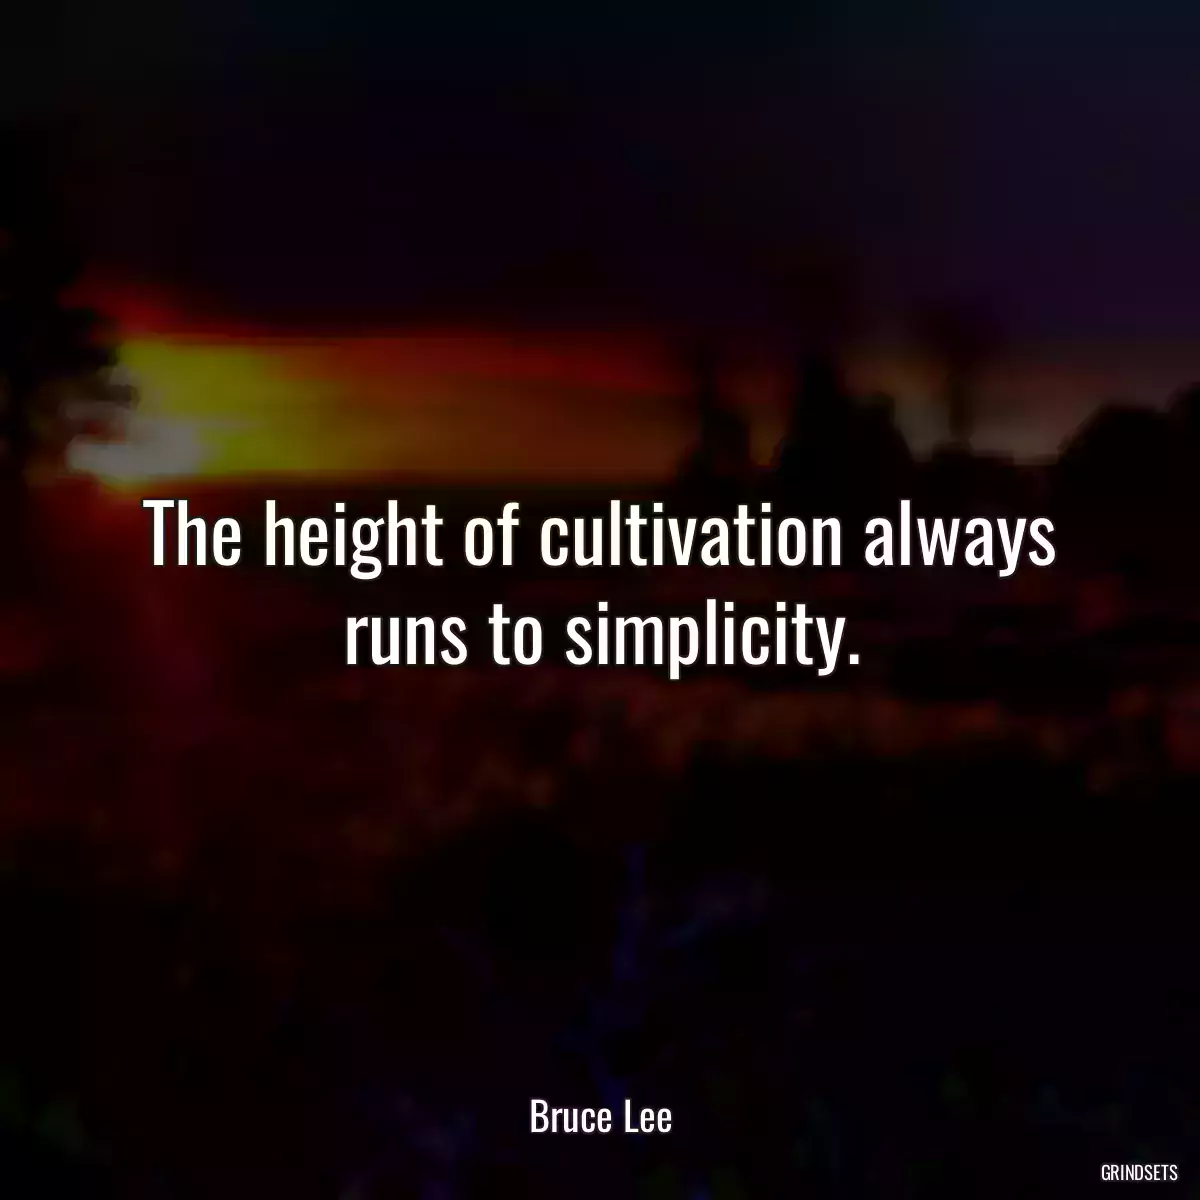 The height of cultivation always runs to simplicity.